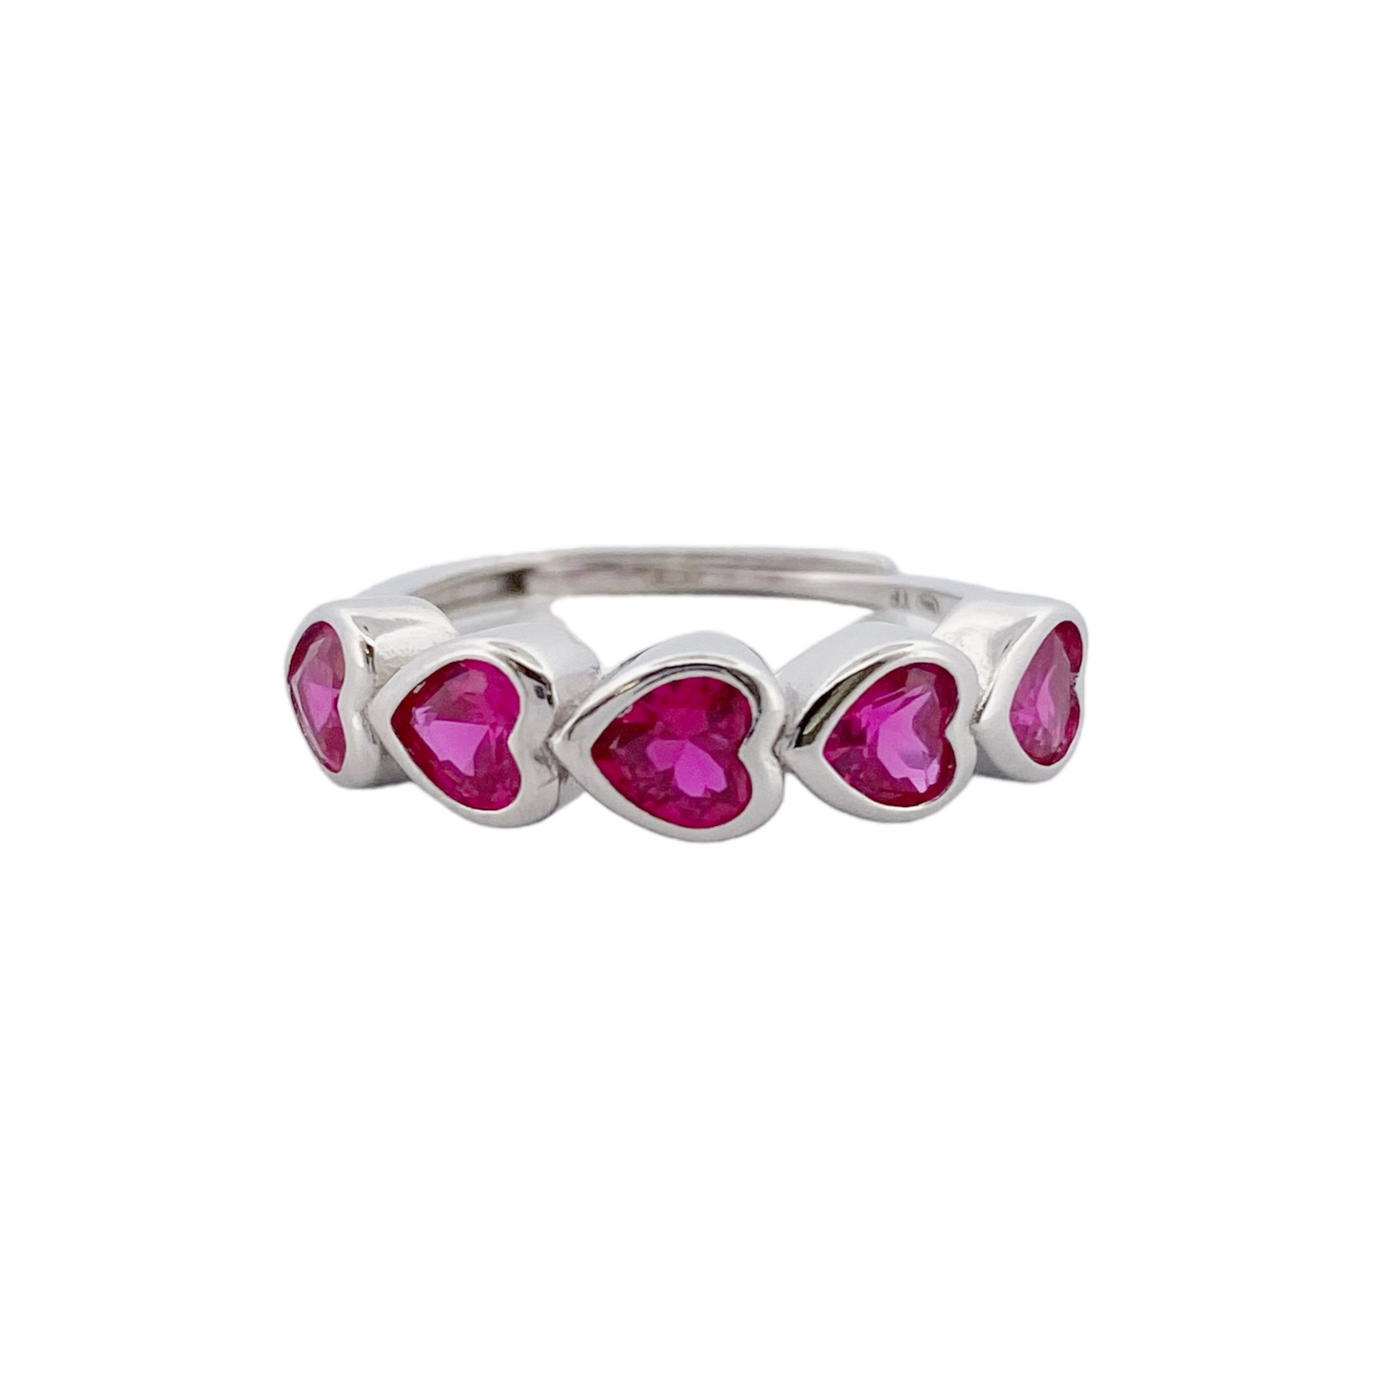 SILVER RING WITH COLORFUL HEARTS